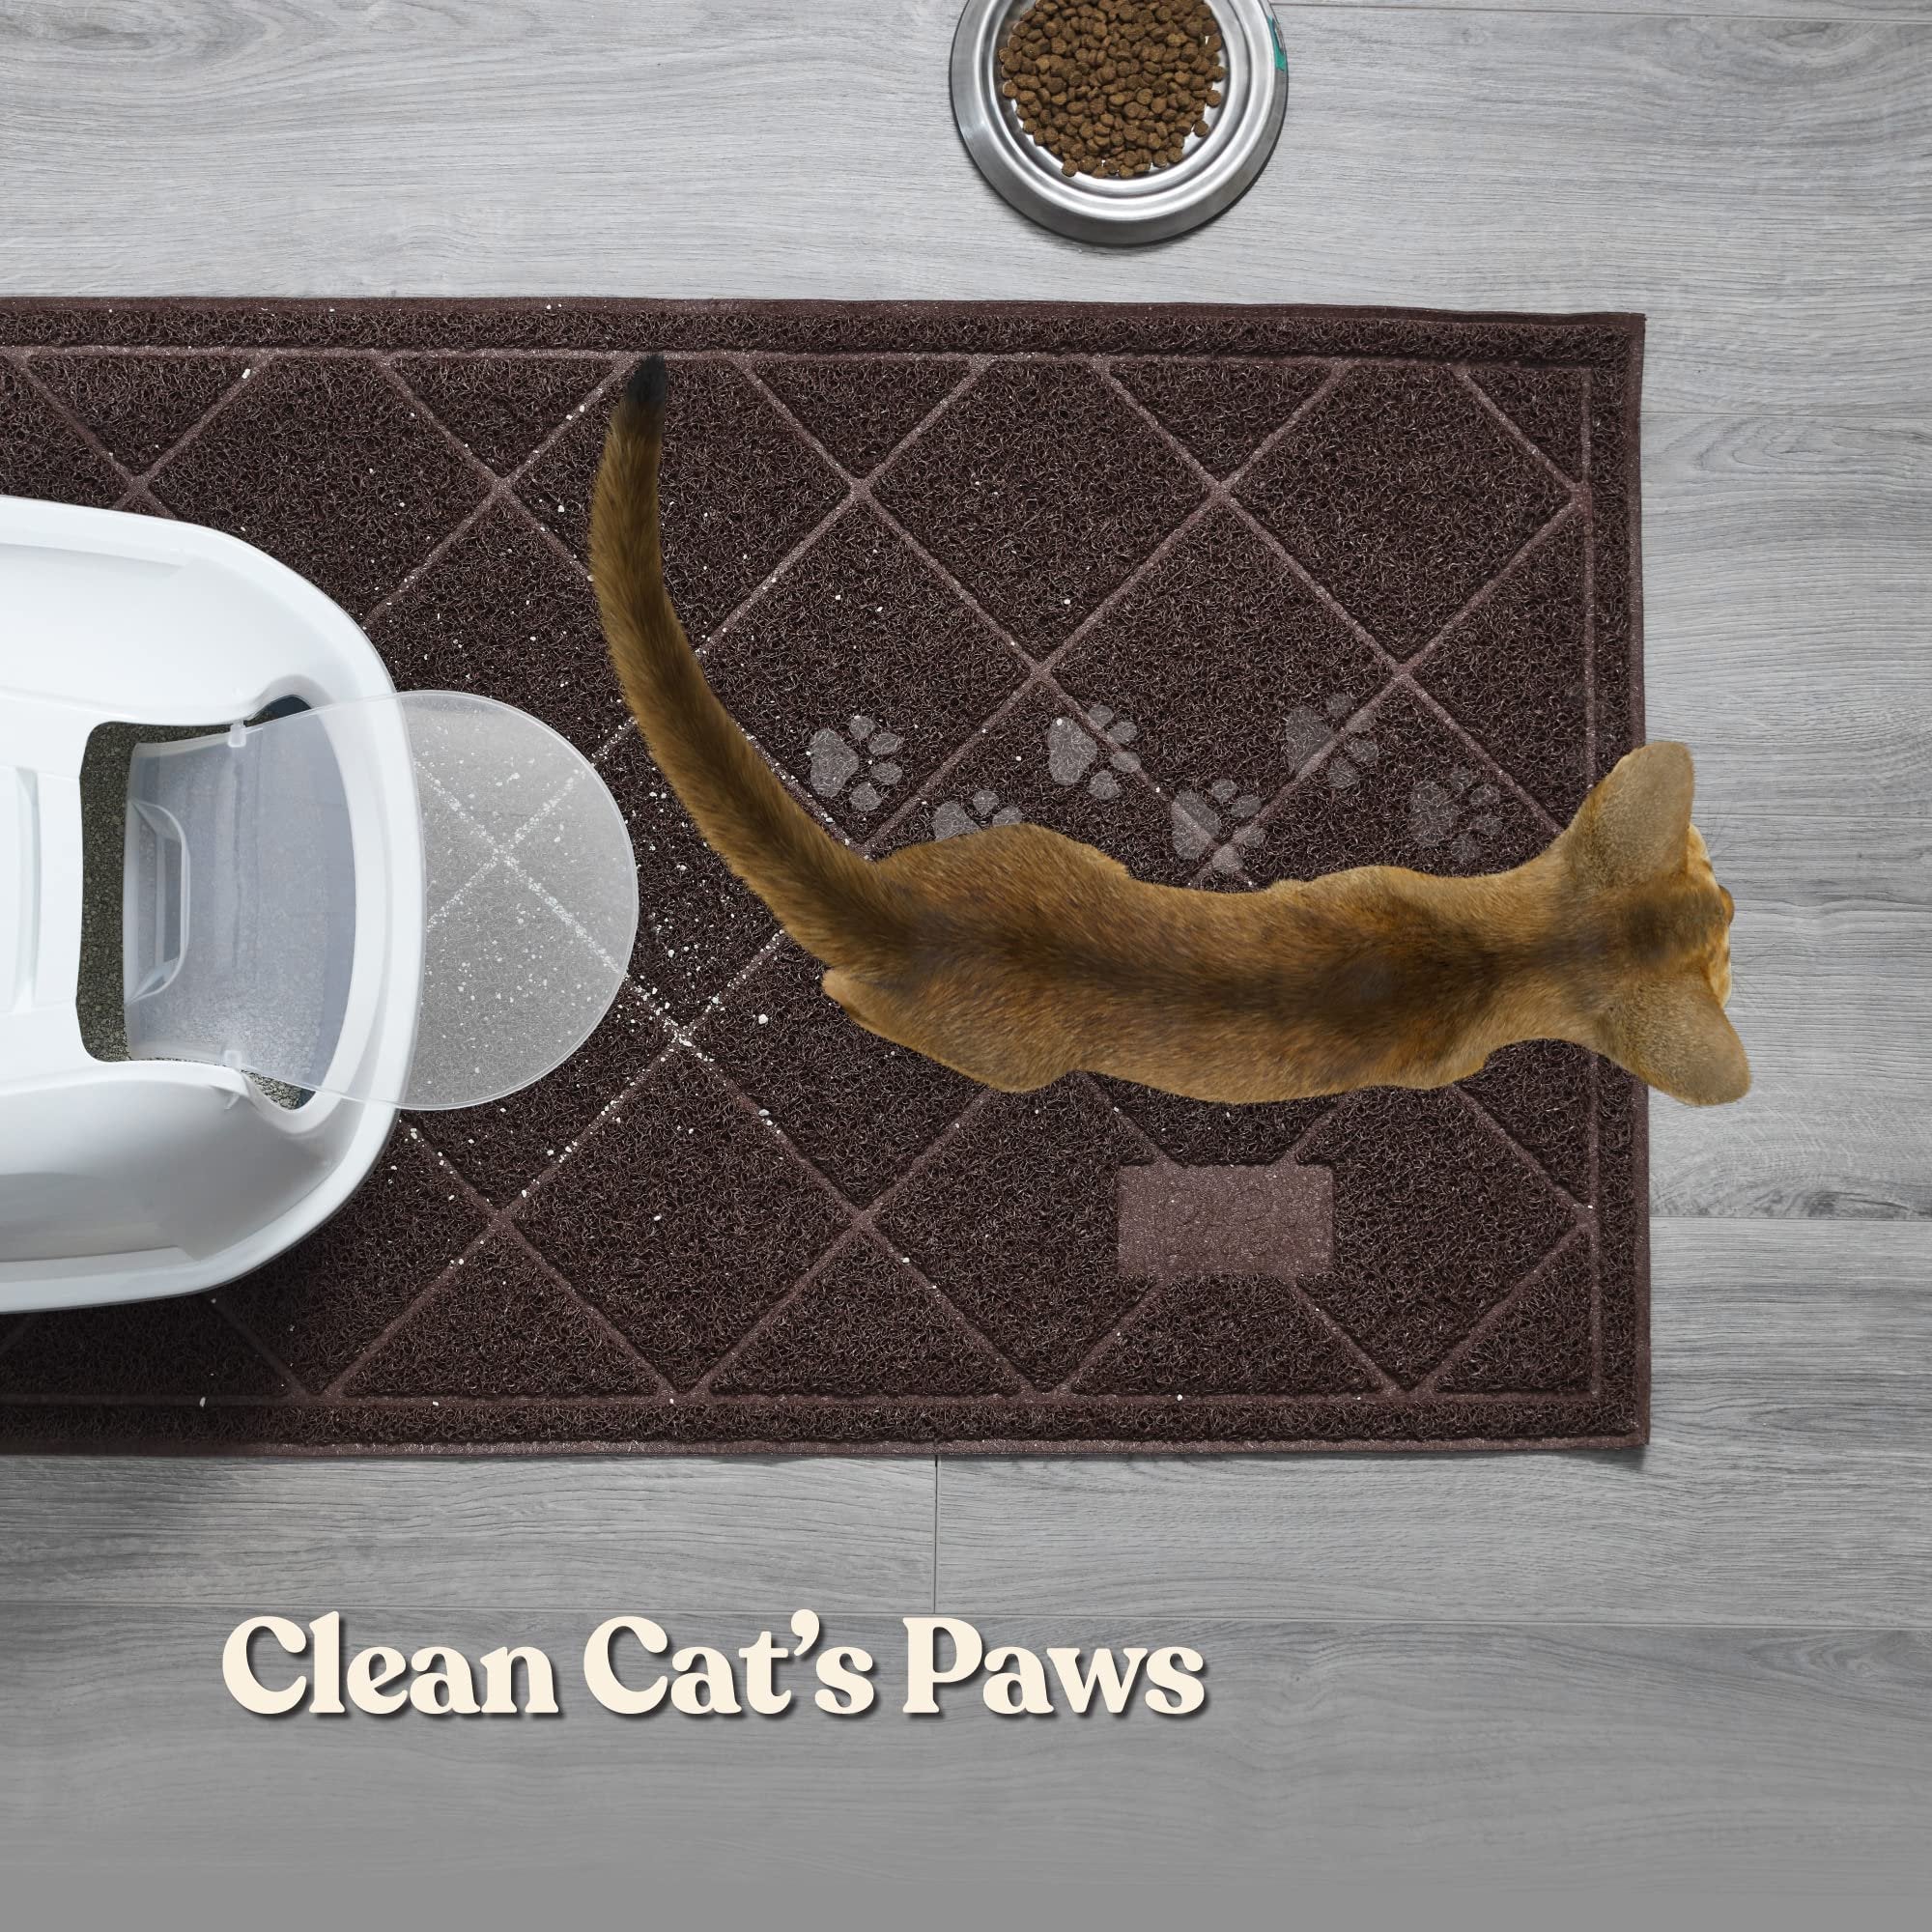 Durable Thick Cat Litter Mat - Modern Cat Mat With Non-Slip Bottom Stays In Place - Super Soft On Kitty Paws - Easy To Clean Litter Box Mat - Waterproof Cat Litter Trapping Mat Protect Floors.